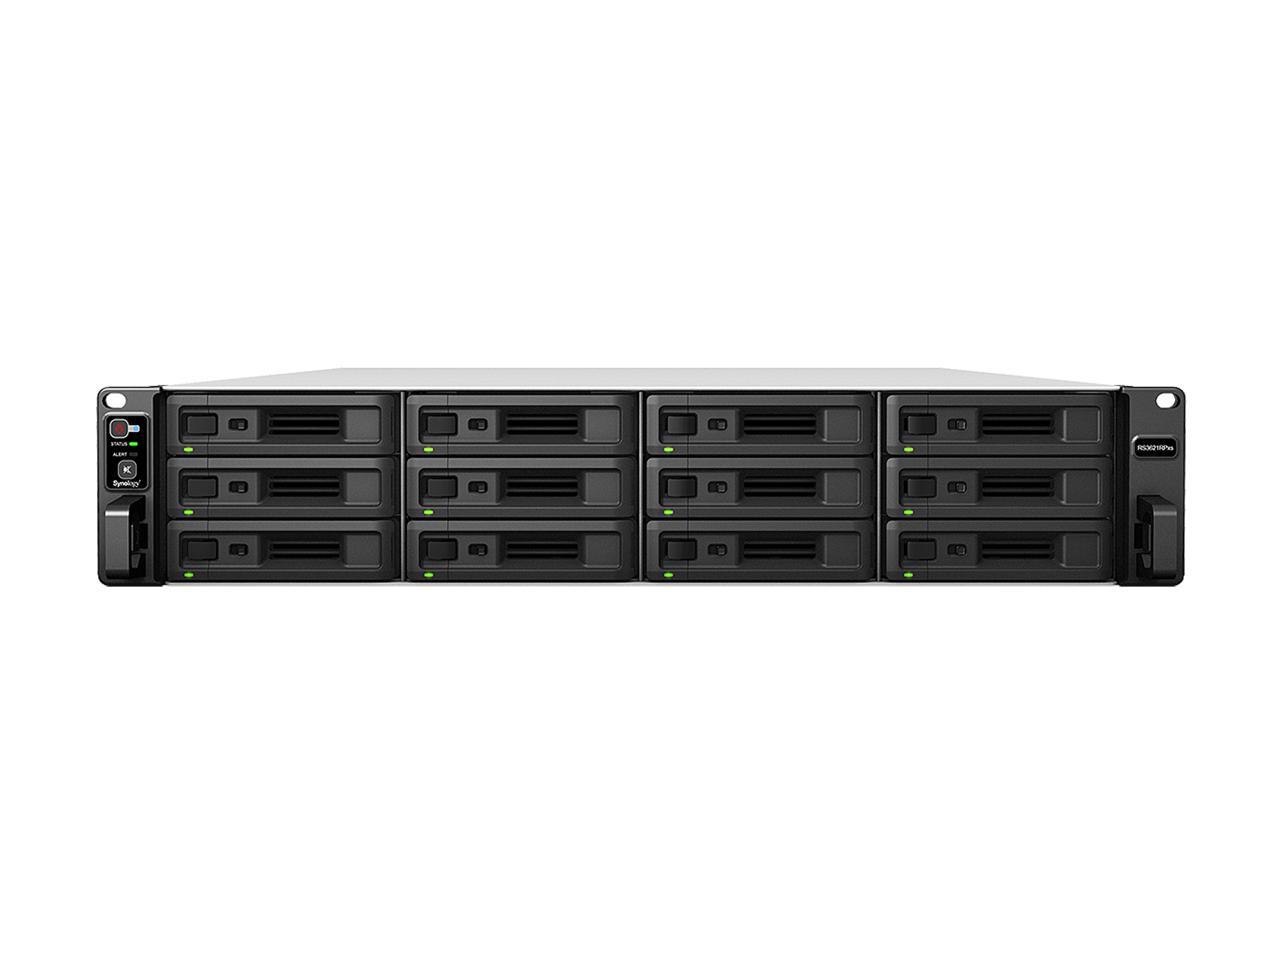 Synology RS3621RPxs RackStation with 64GB RAM, E10G30-T2 10GbE Card, 1.6TB (2x800GB) Cache, RKS-02 Rail Kit & 192TB (12 x 16TB) of Synology Enterprise Drives Fully Assembled and Tested